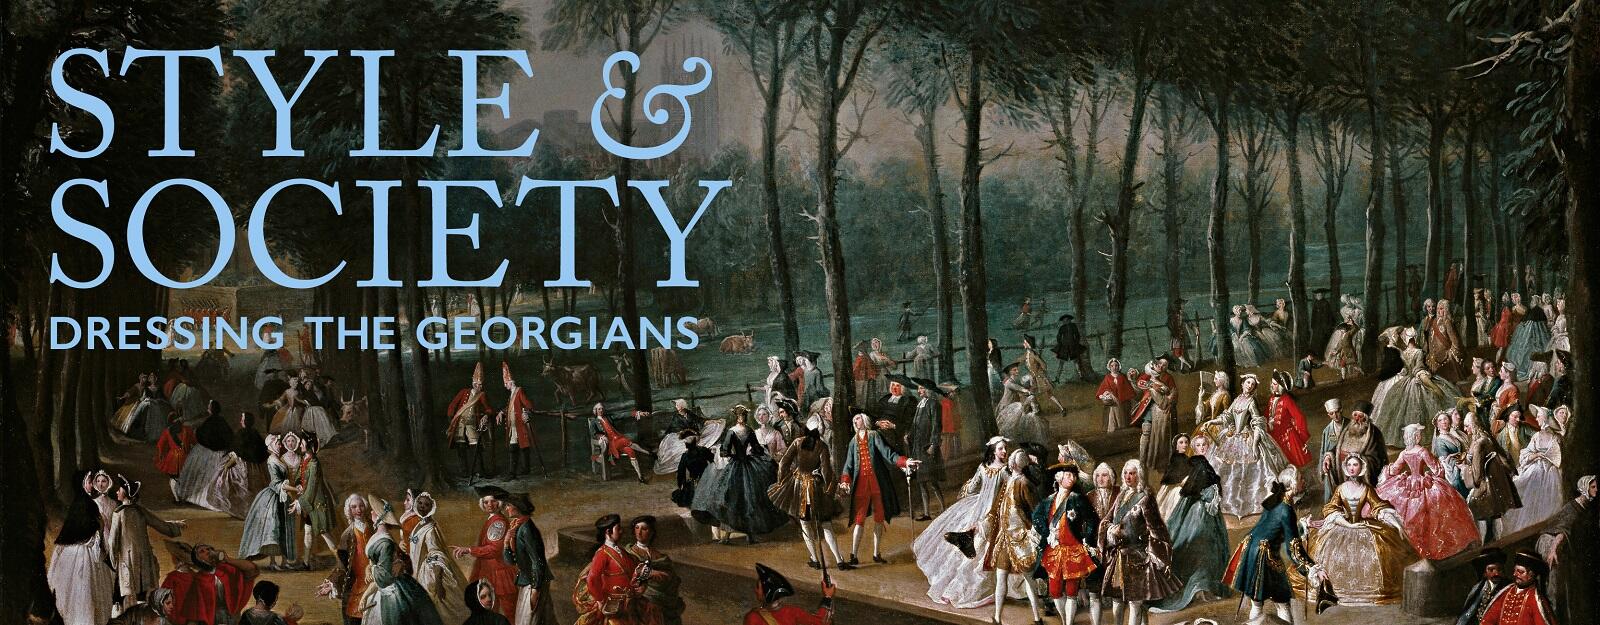 Style & Society: Dressing the Georgians exhibition